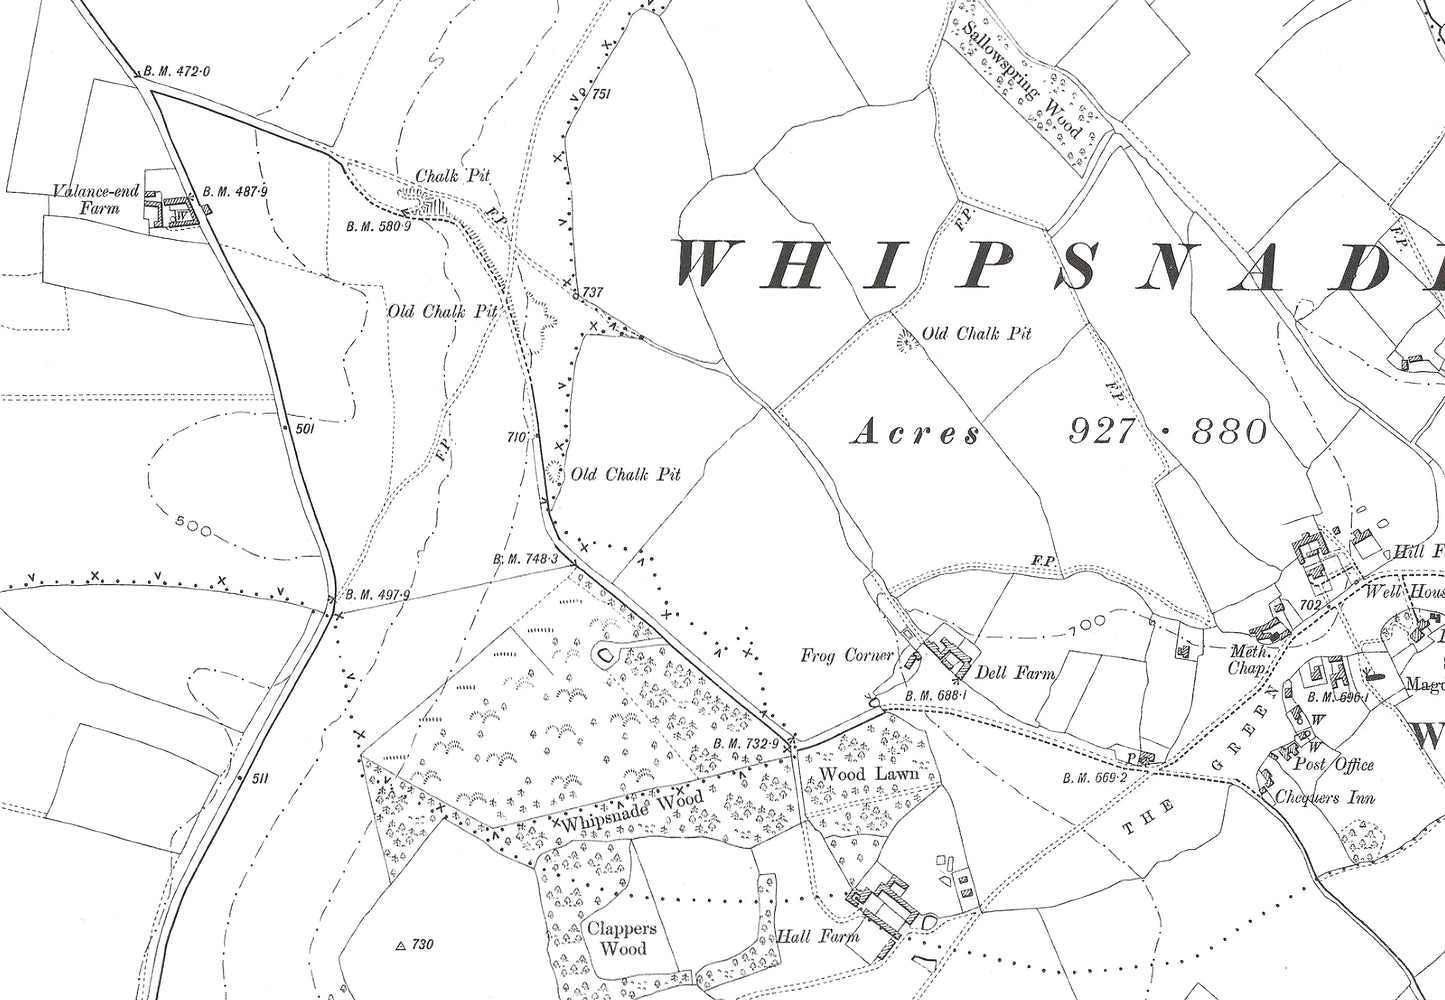 A 1902 map showing Whipsnade in Bedfordshire - A Digital Download of OS 1:10560 scale map, Beds 32SW